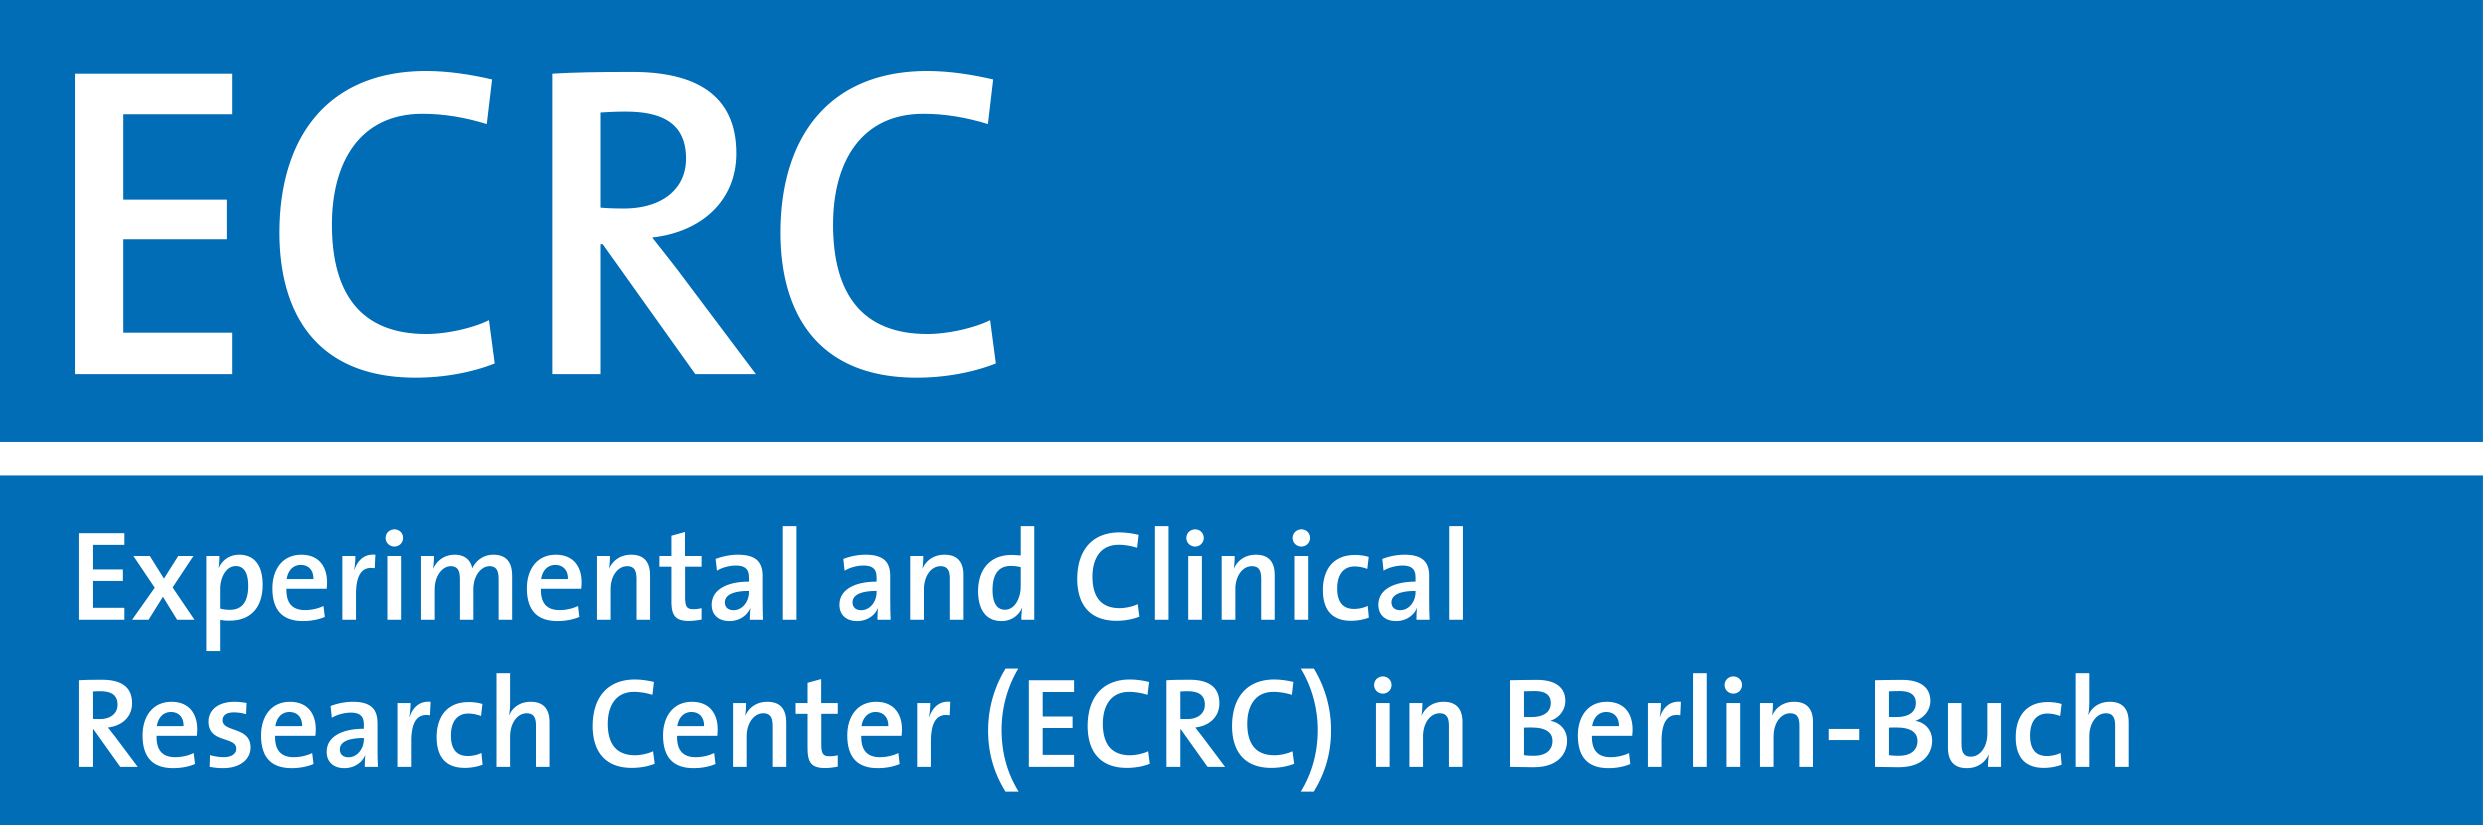 Experimental and Clinical Research Center (ECRC)